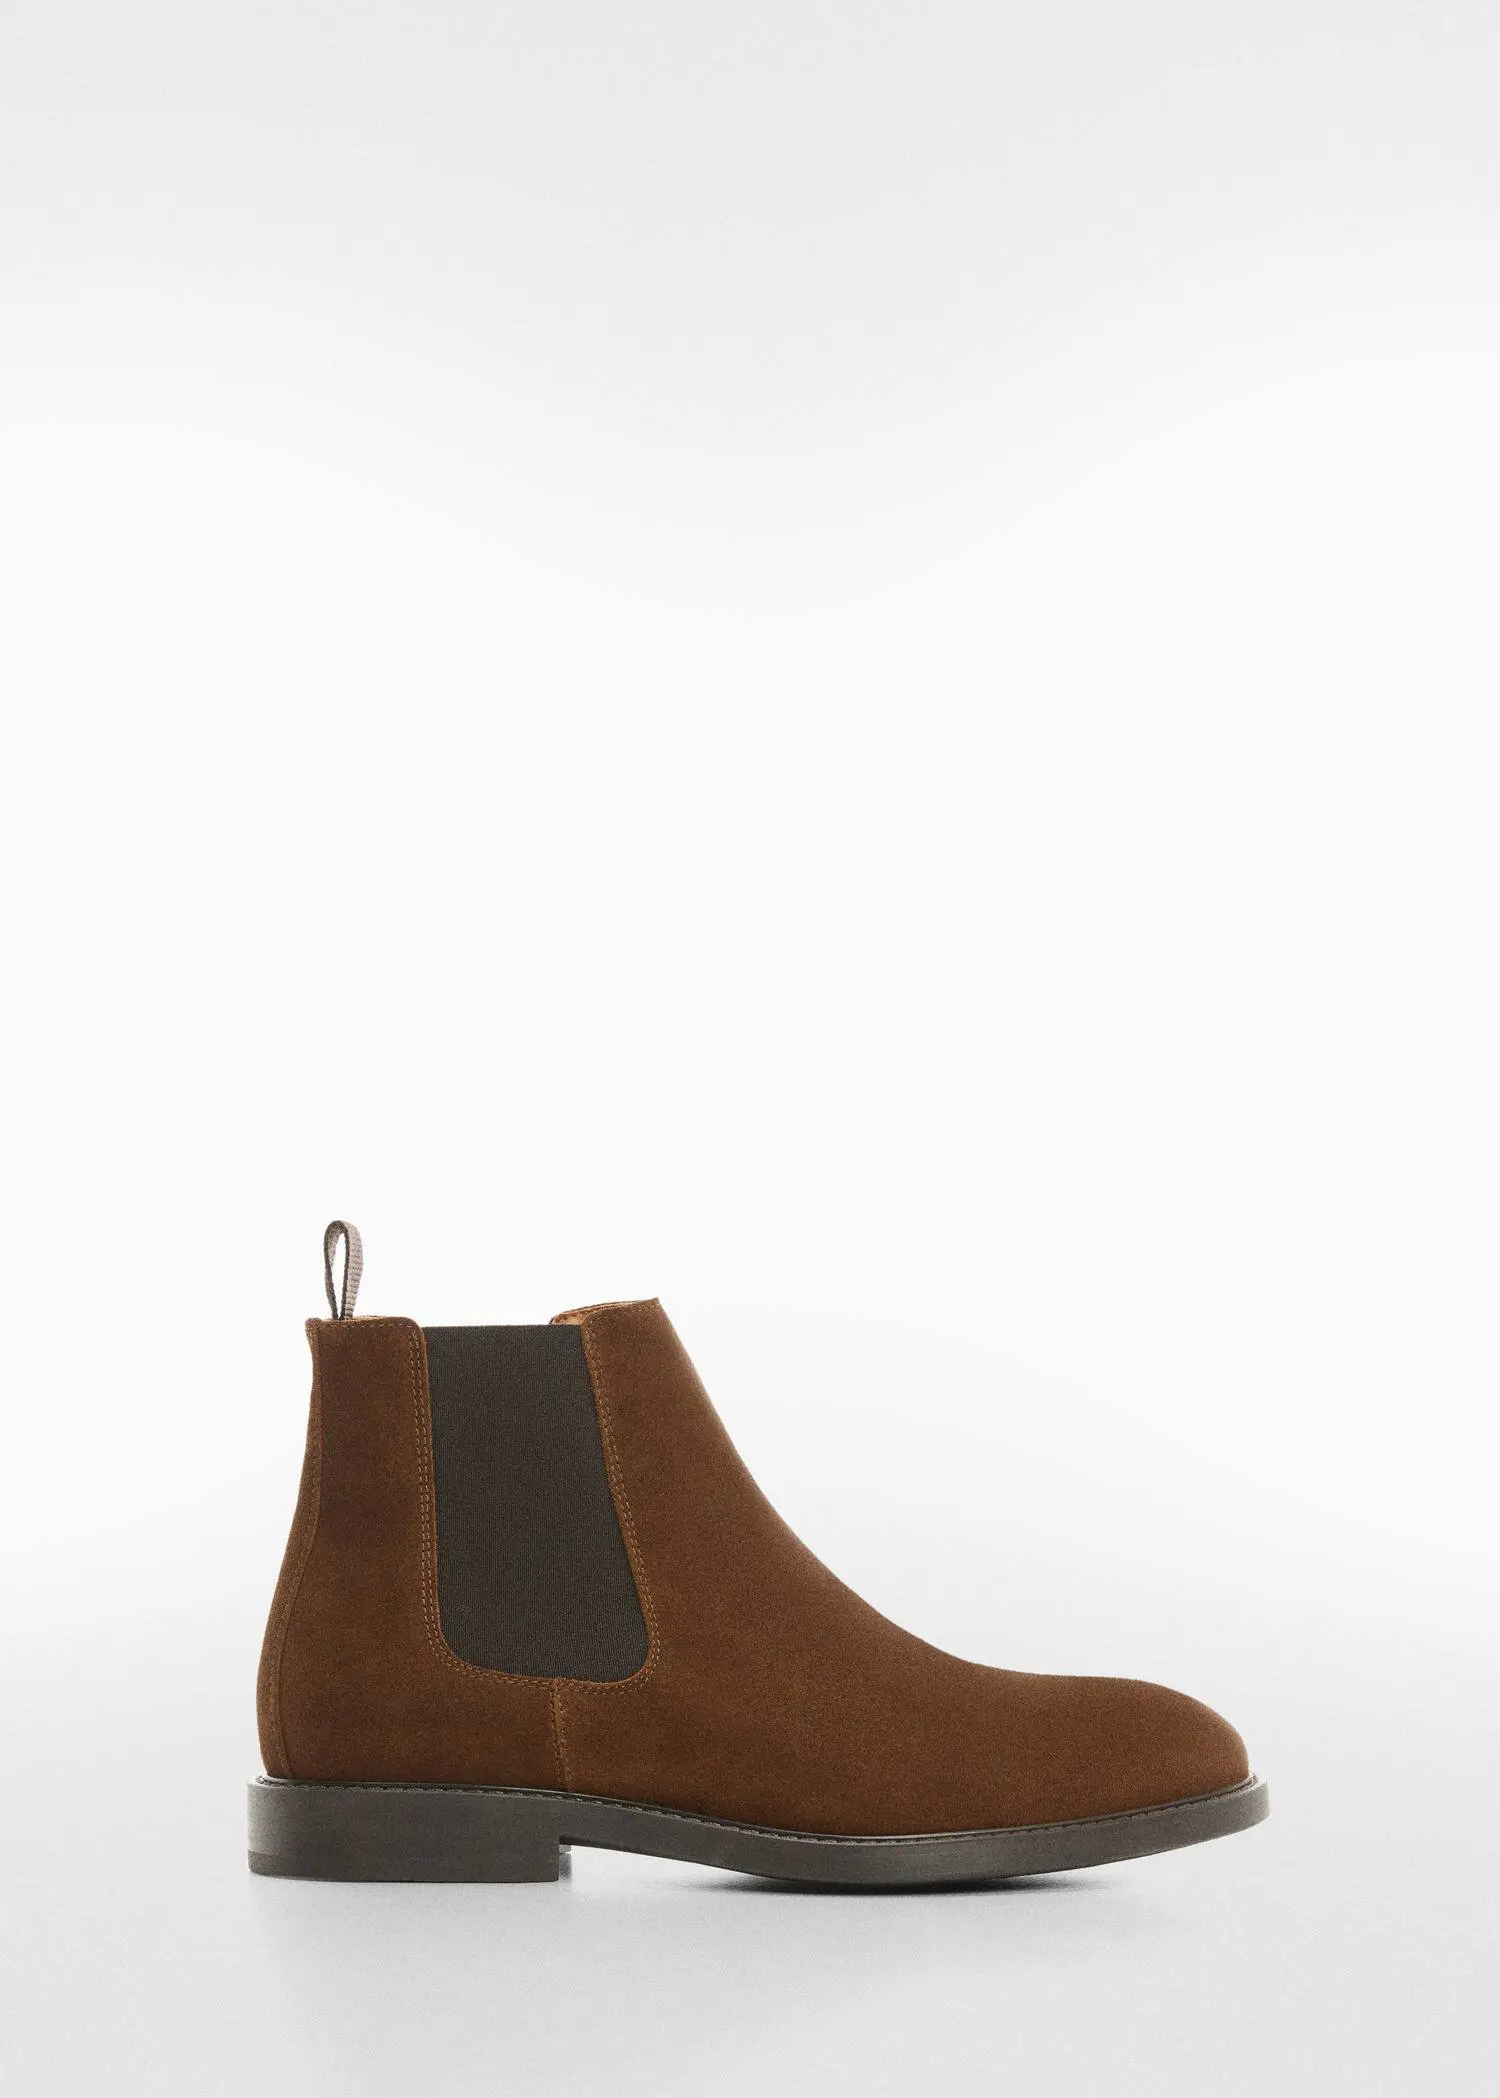 Mango Suede Chelsea ankle boots. 1